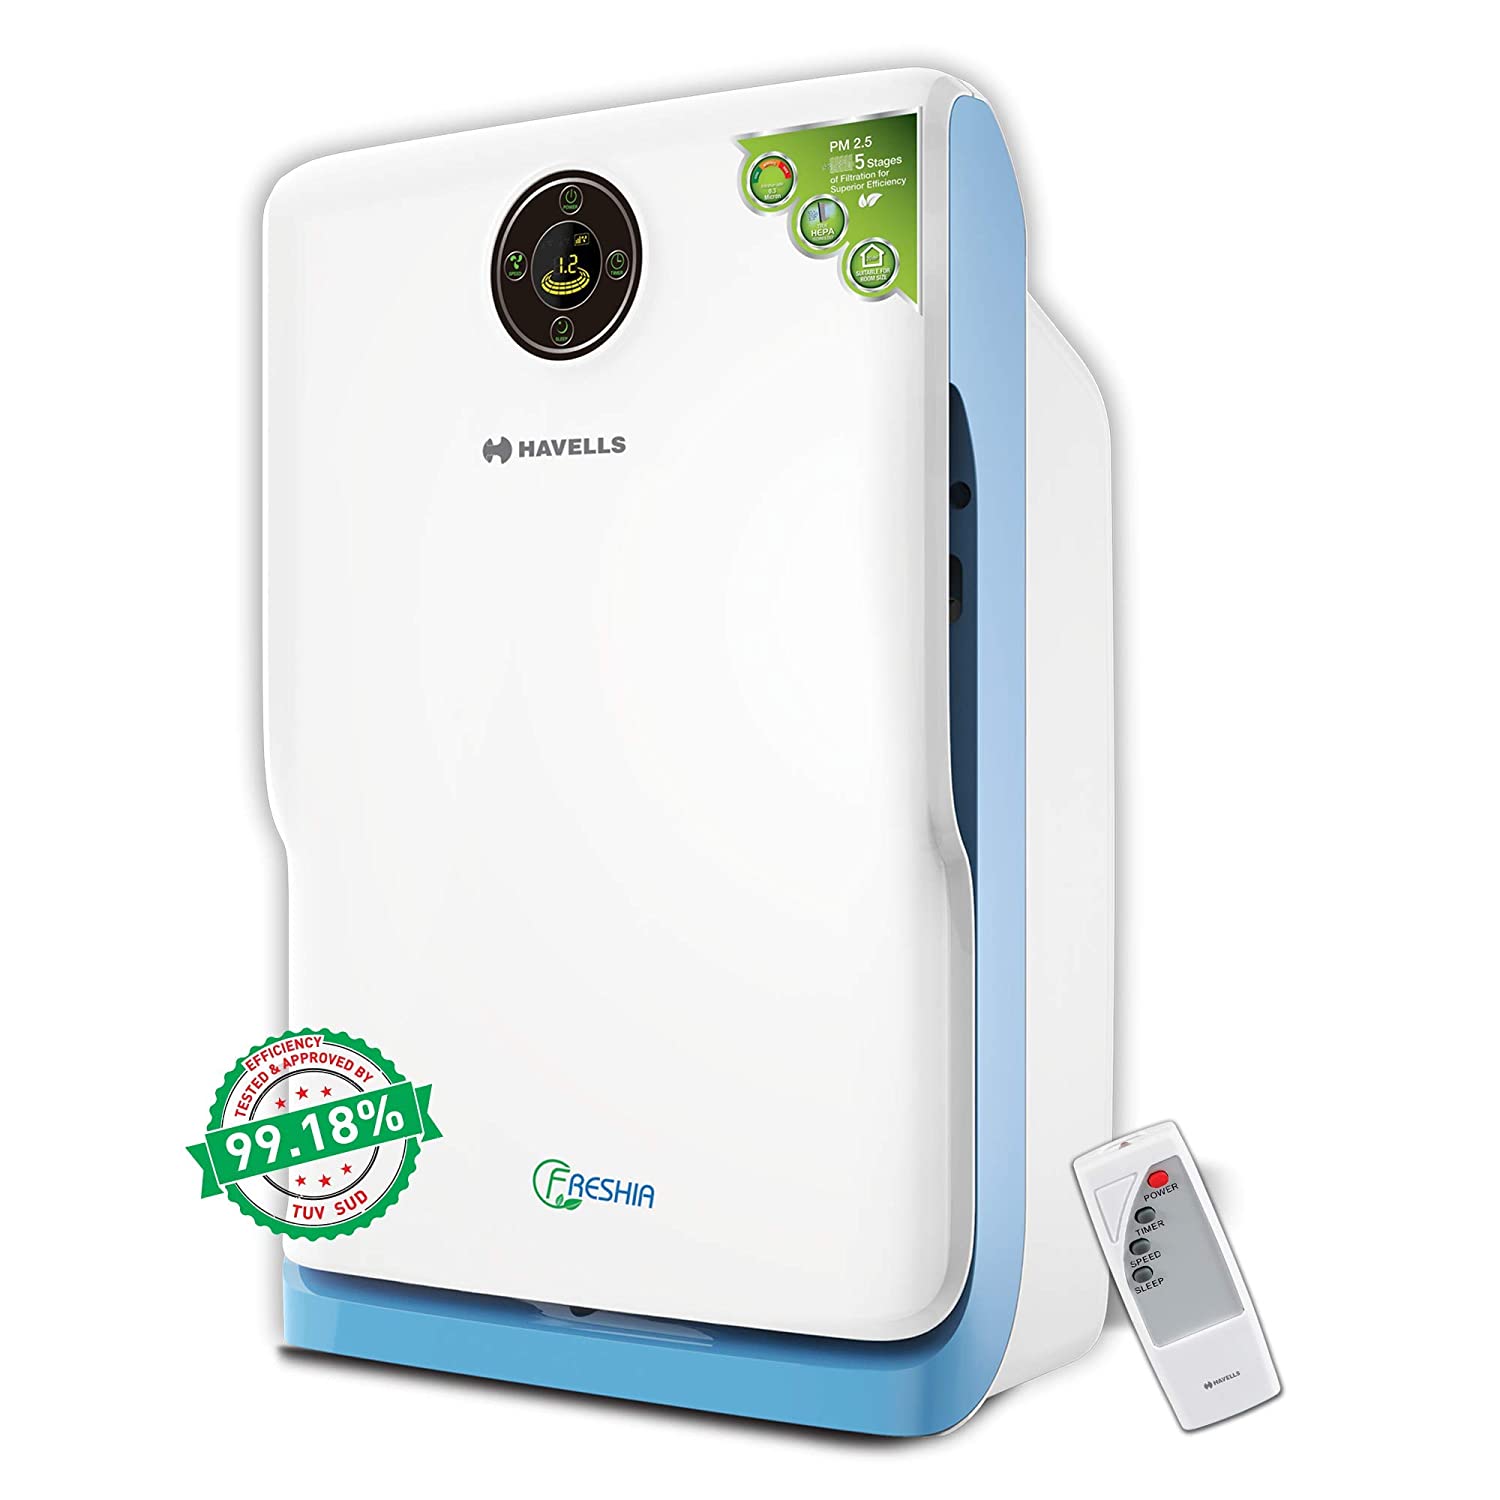 Havells Freshia AP-20 is the best HEPA air purifier under Rs. 10,000 and made in India